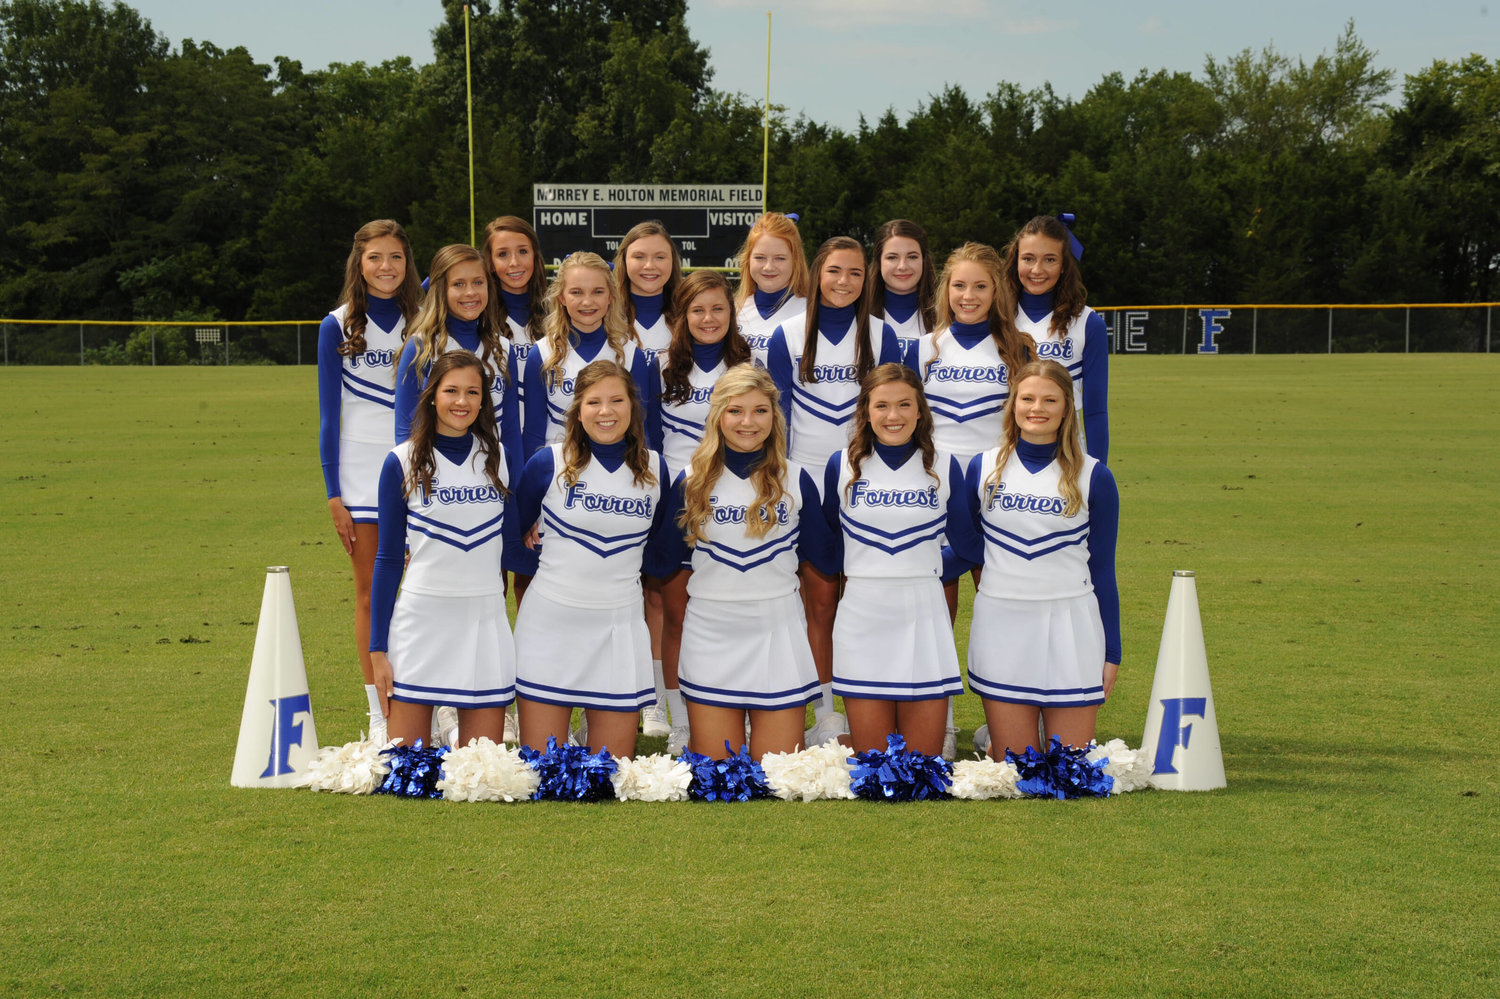 The 2020 Forrest Cheerleaders front row from left are, Anna Welch, Kinley Harber, Claire Gillespie, Berkley Allen, and Erin Wilson. Middle row from left are, Ellie Lancaster, Aspen Grubbs, Adi Stuard, Alysa Ray, and Bailey Connor. Back row from left are, Mary Grace Stacey, Sydney G. Ross, Sydney T. Ross, Paeton Cook, Kyla Bailey, and Sarah Armstrong.